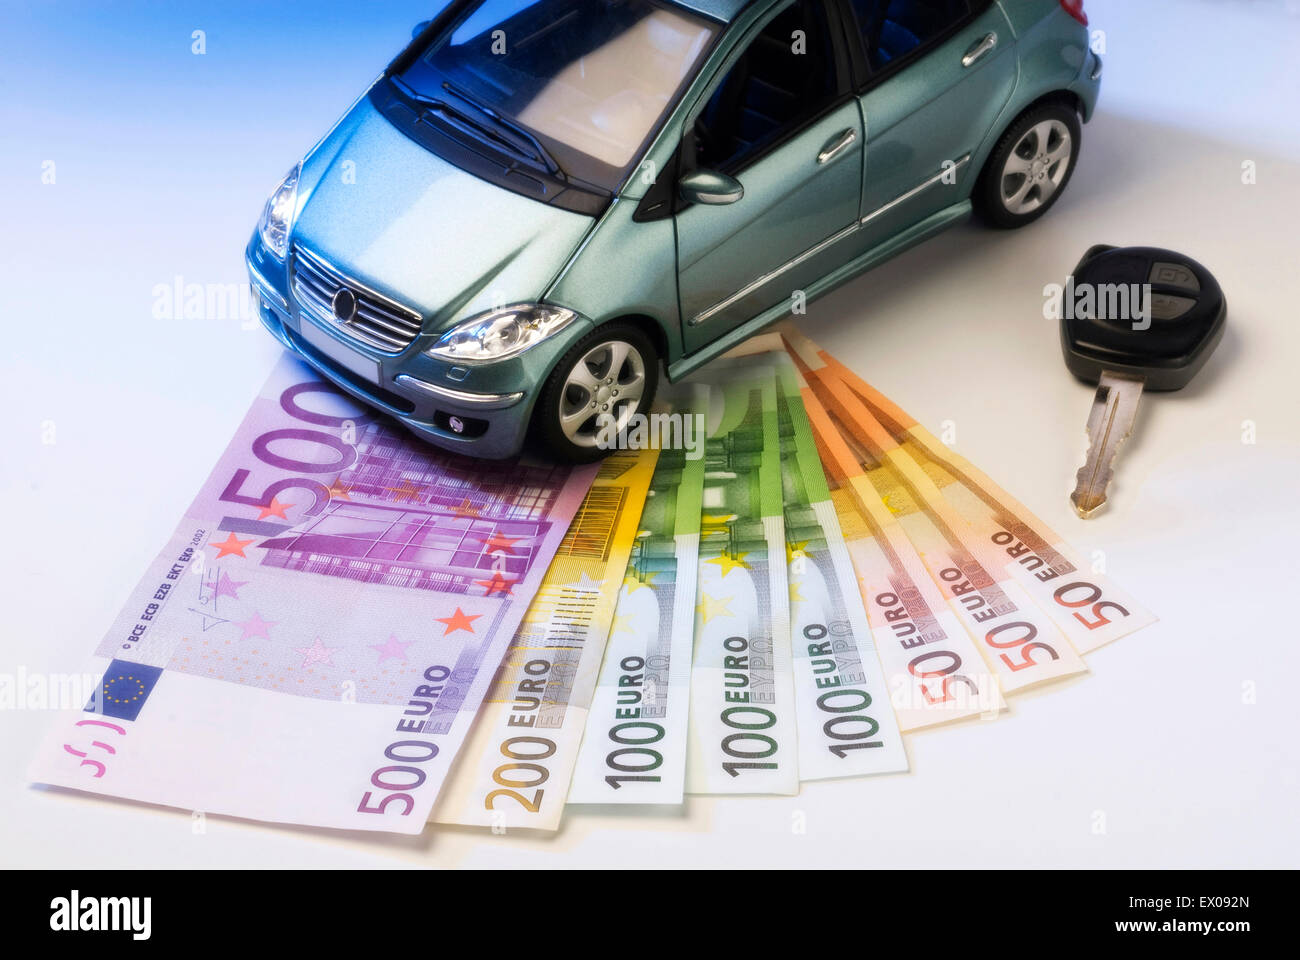 Car with key and bank notes Stock Photo